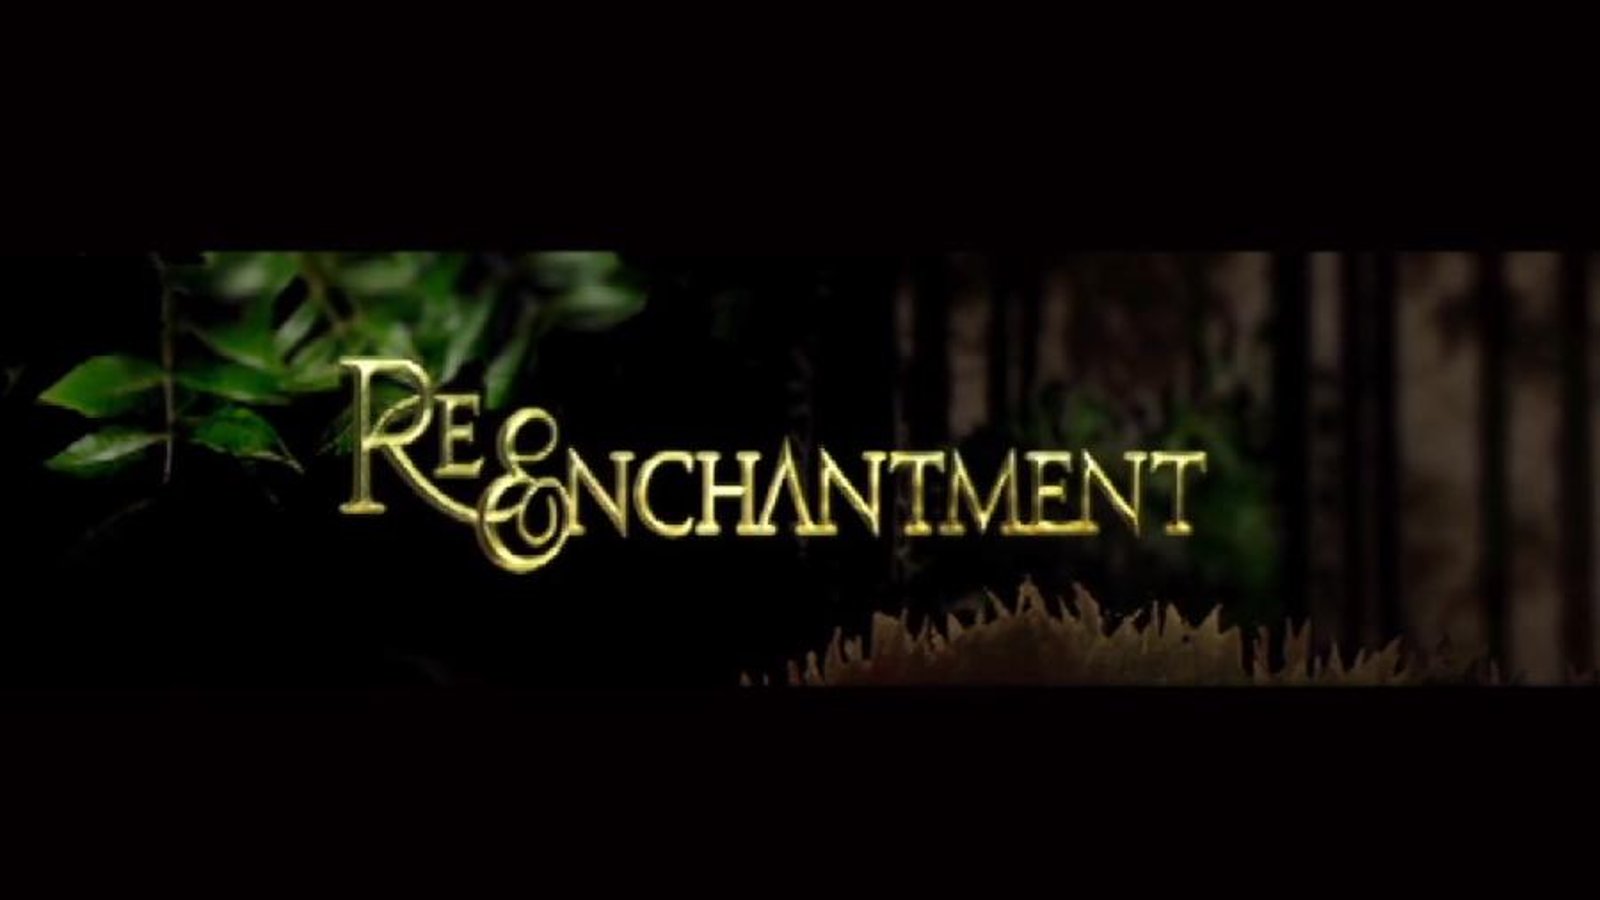 Re-enchantment - The Hidden Meanings of Fairy Tales